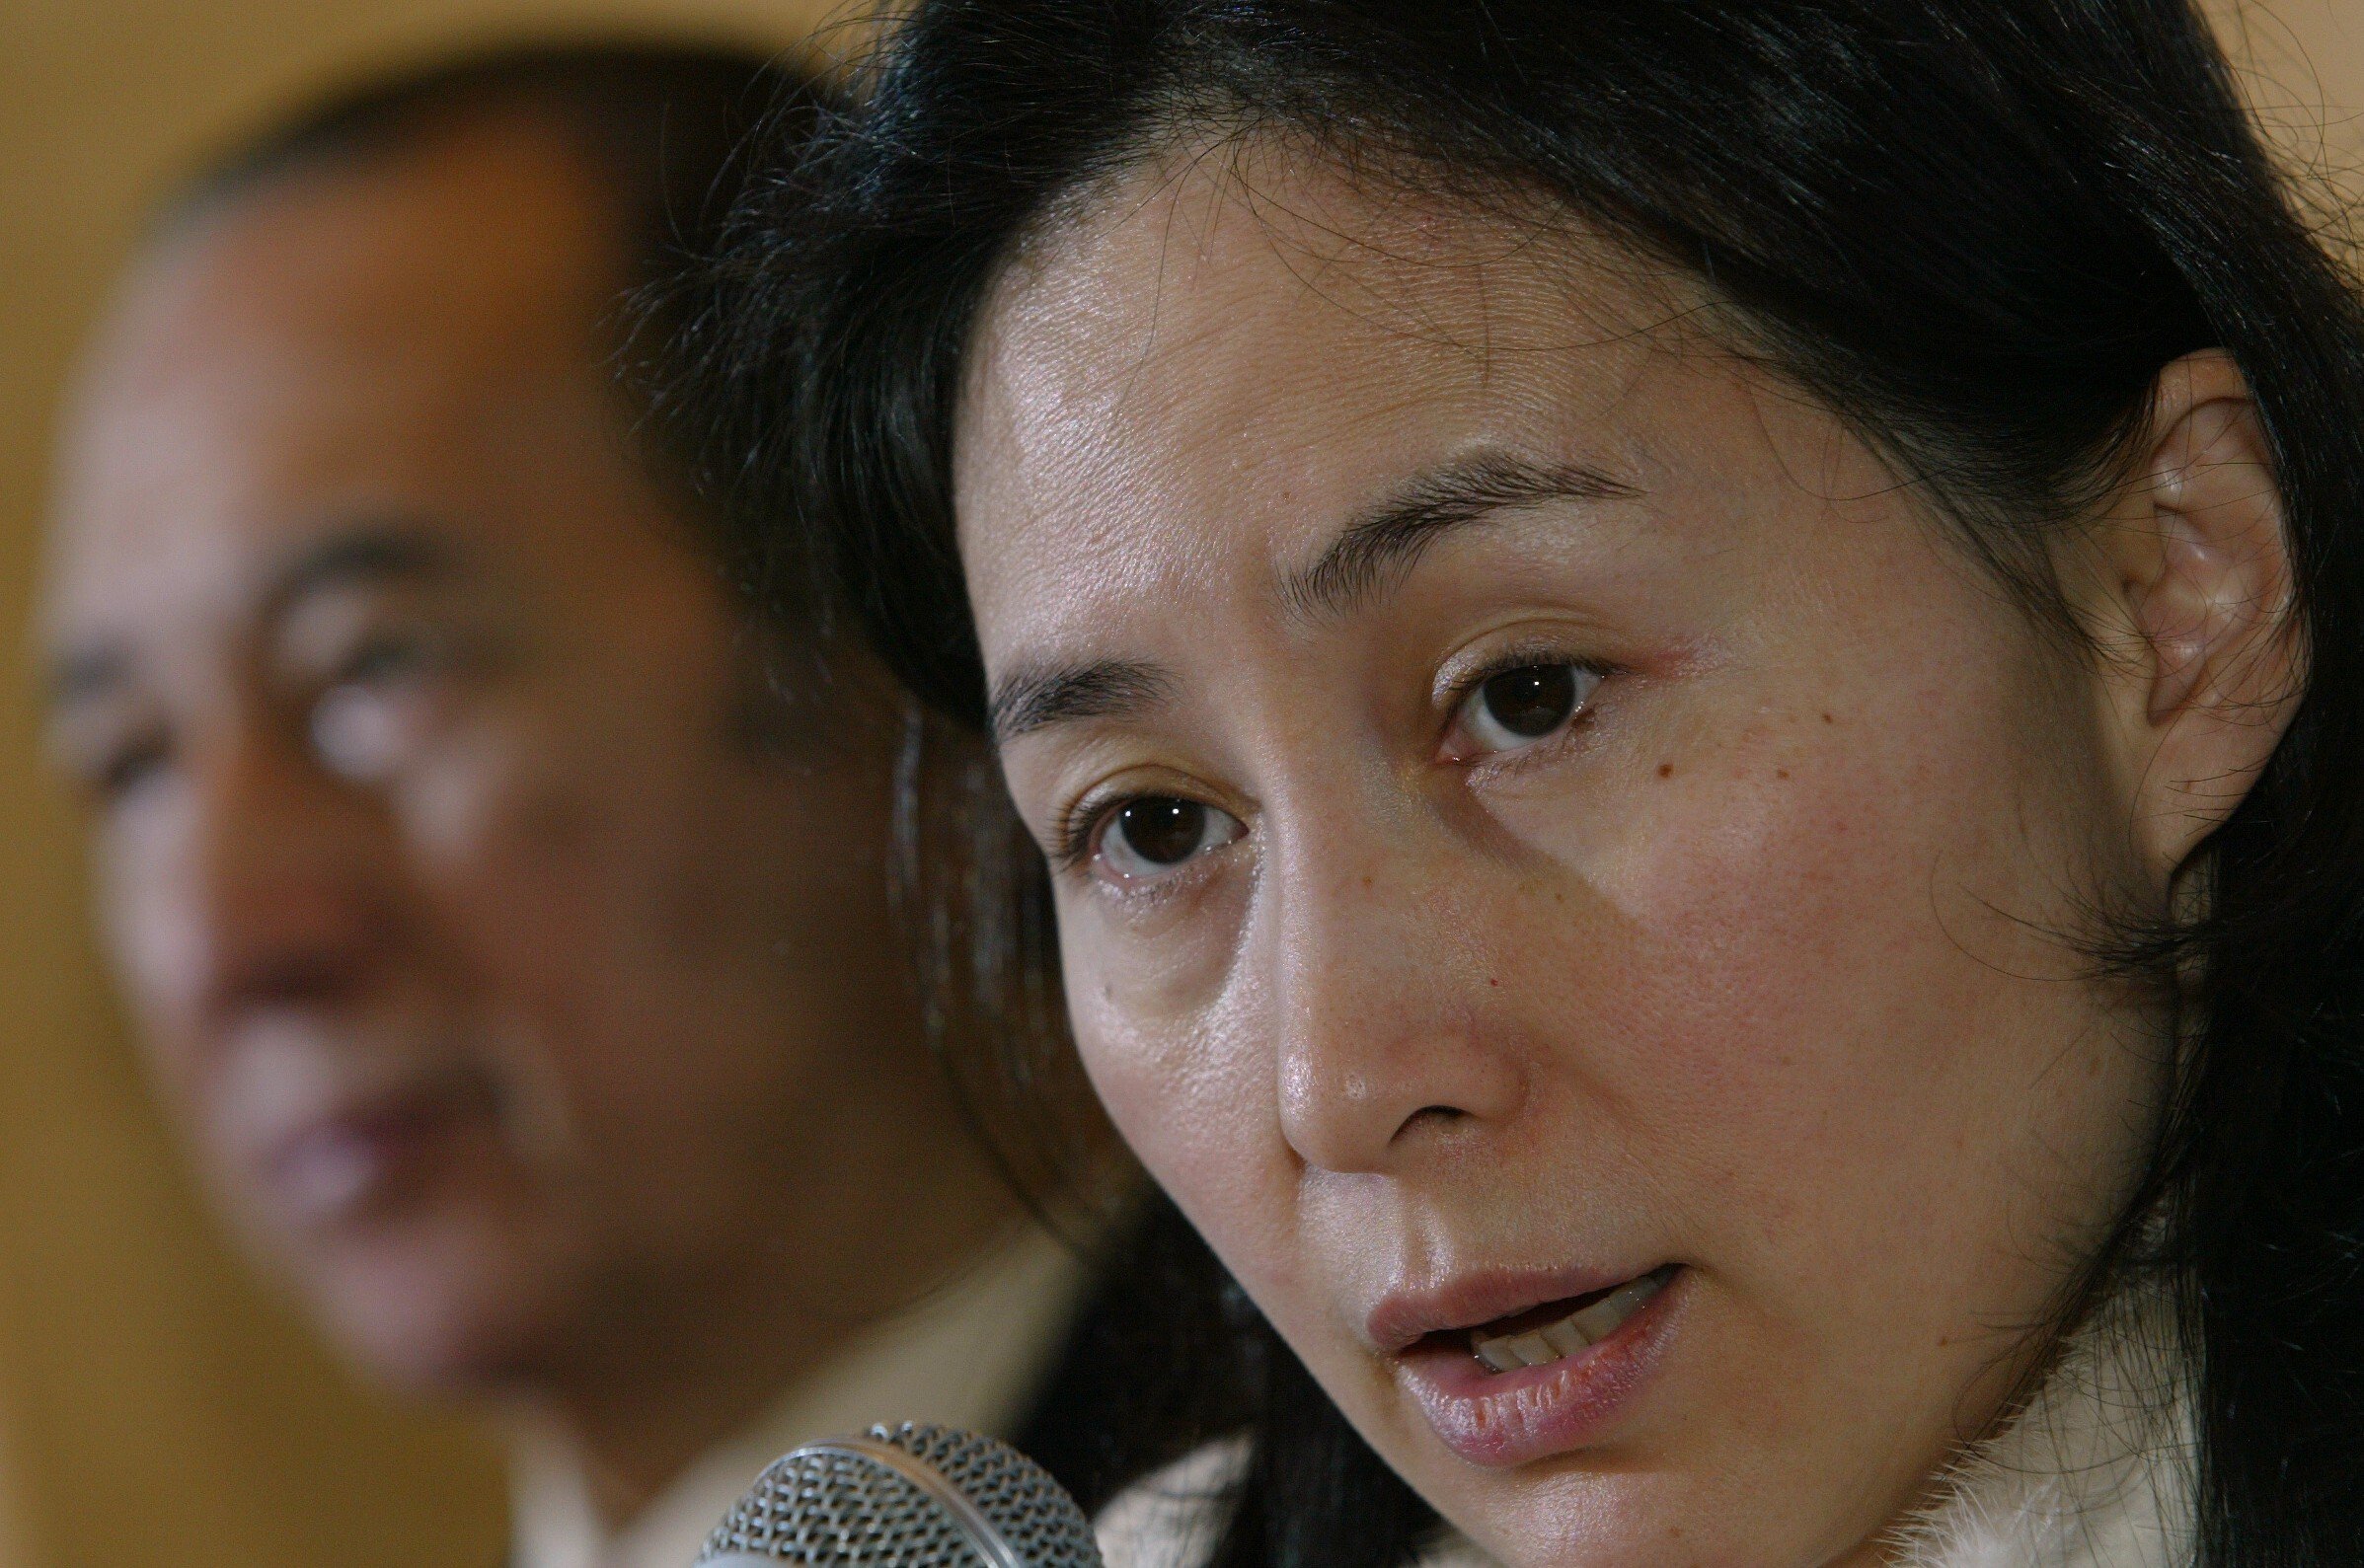 Stanley Ho (left, background) and Pansy Ho (foreground, right) at Shun Tak Holdings’ media conference on 19 January 2006. Photo: SCMP